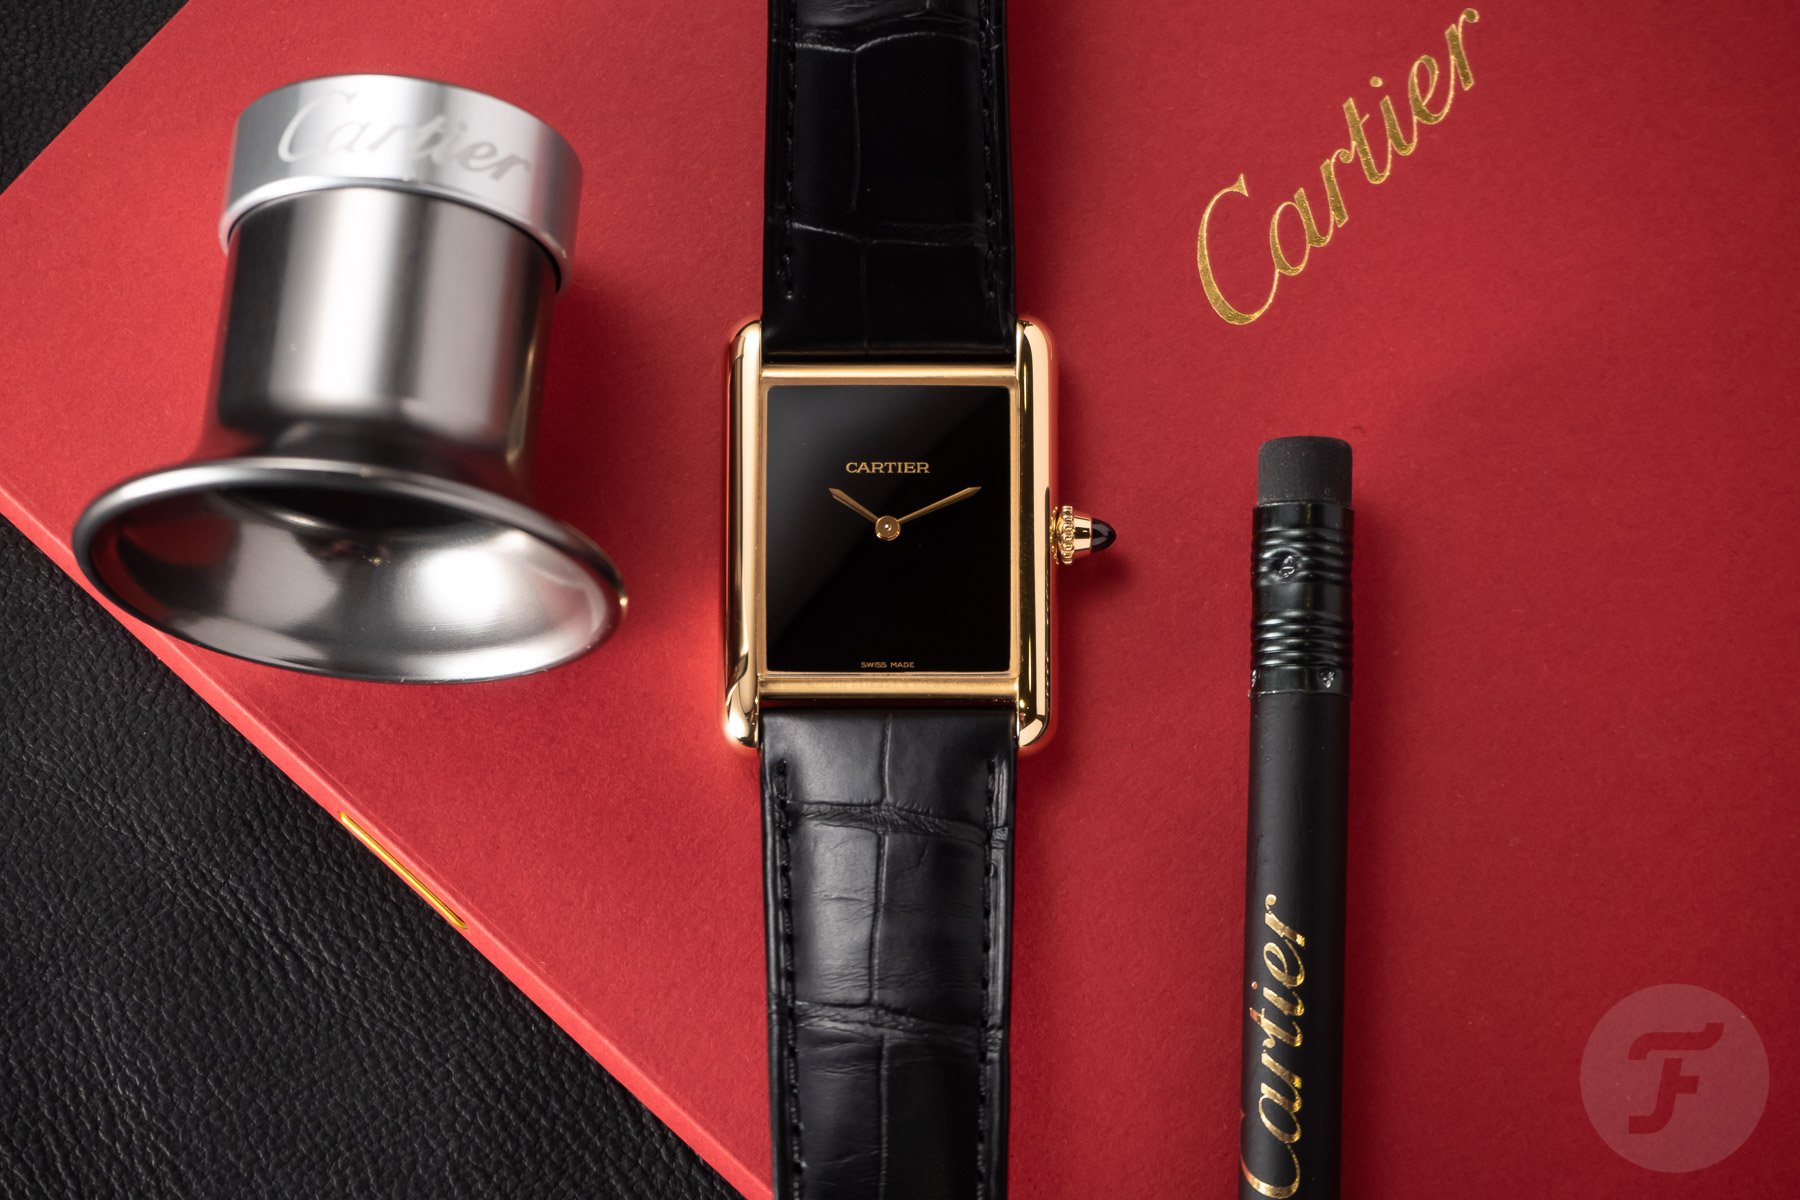 Luxury Gold Watches - All You Need To Know - Global Boutique